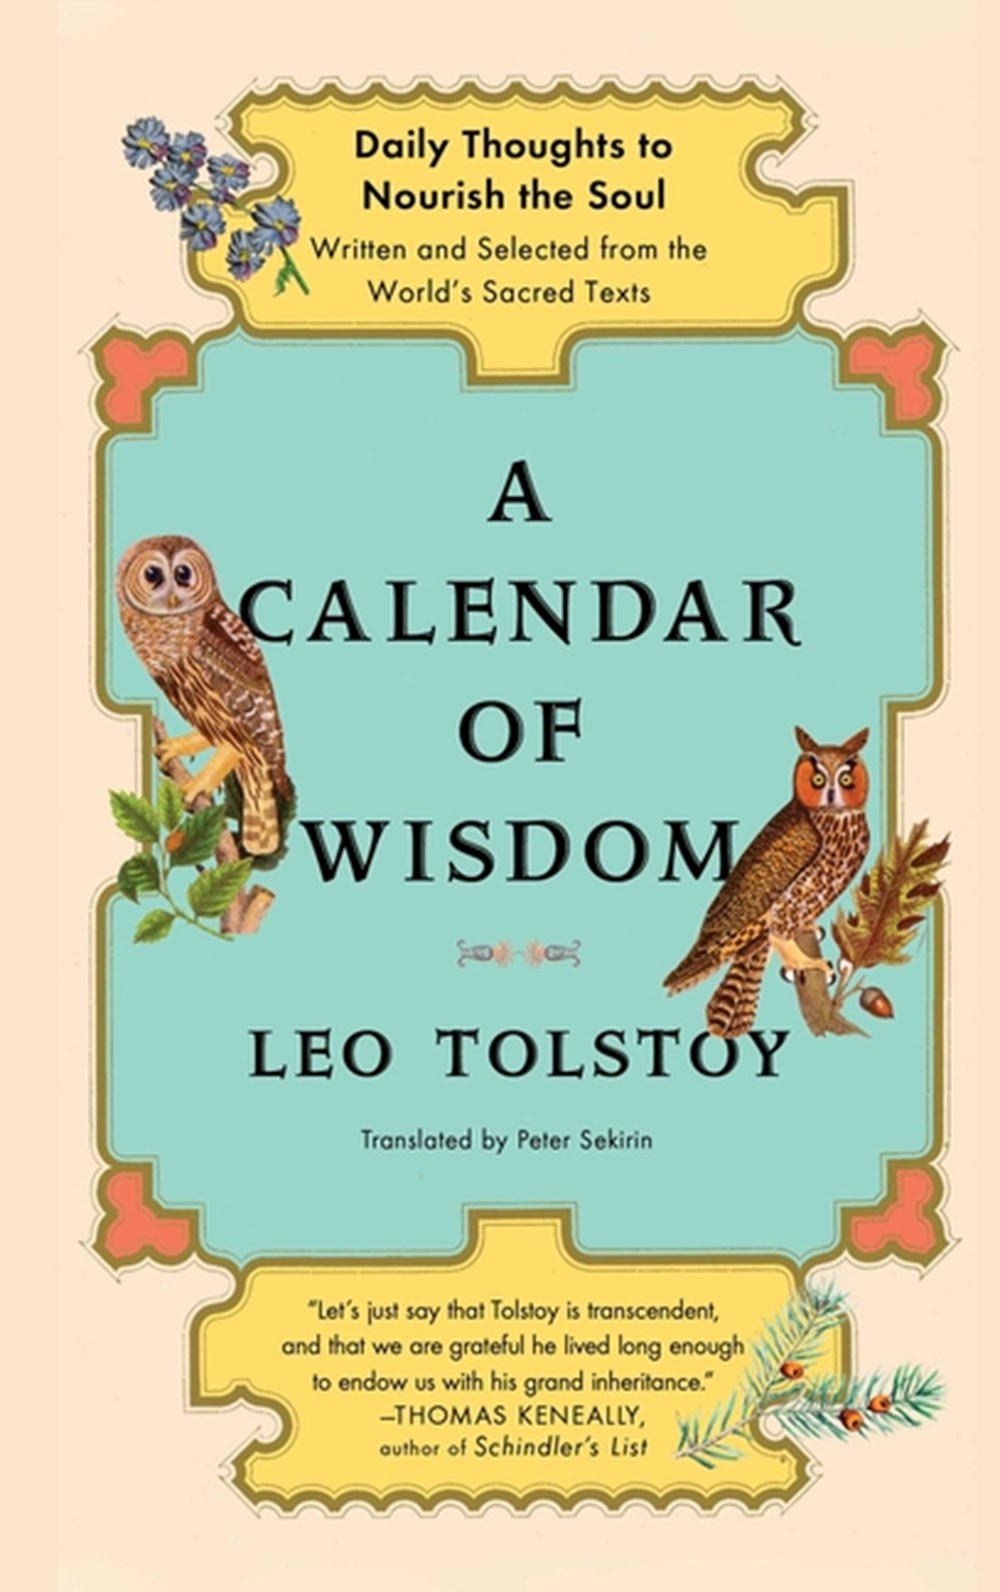 Calendar of Wisdom: Daily Thoughts to Nourish the Soul, Written and Selected from the World's Sacred